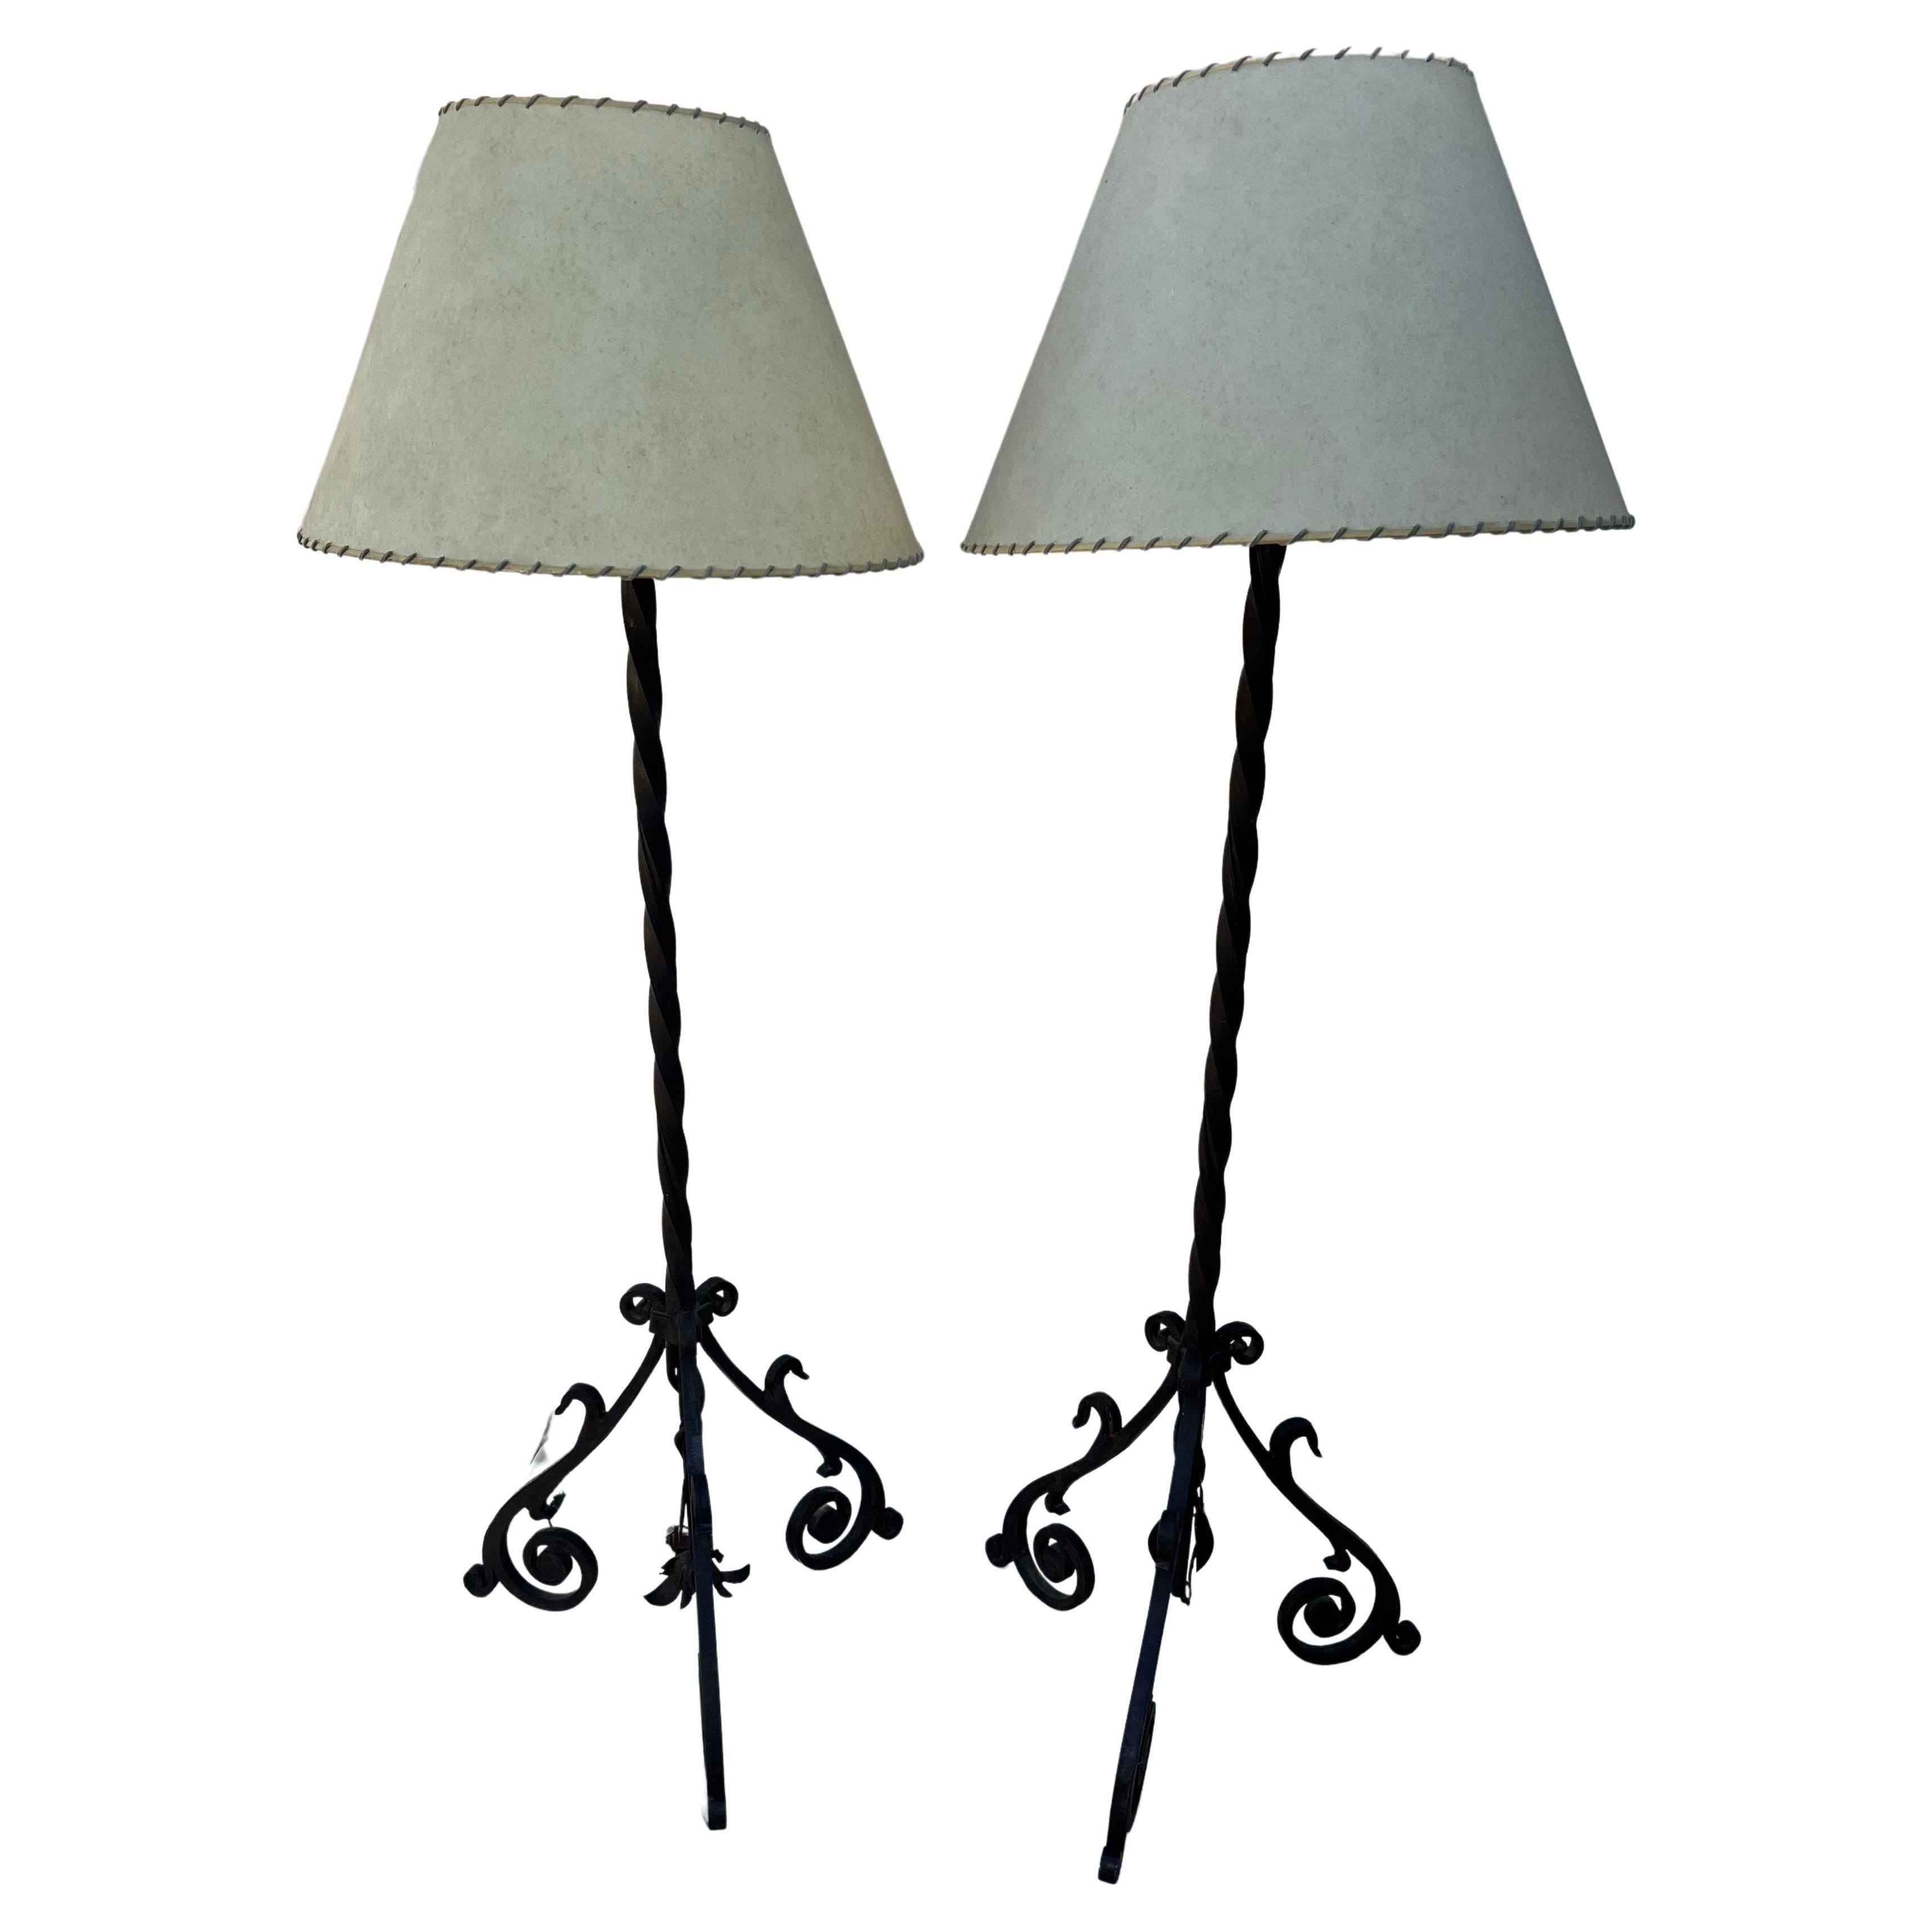 Pair of Hand Wrought Twisted Iron Floor Lamps with Custom Parchment Shades 